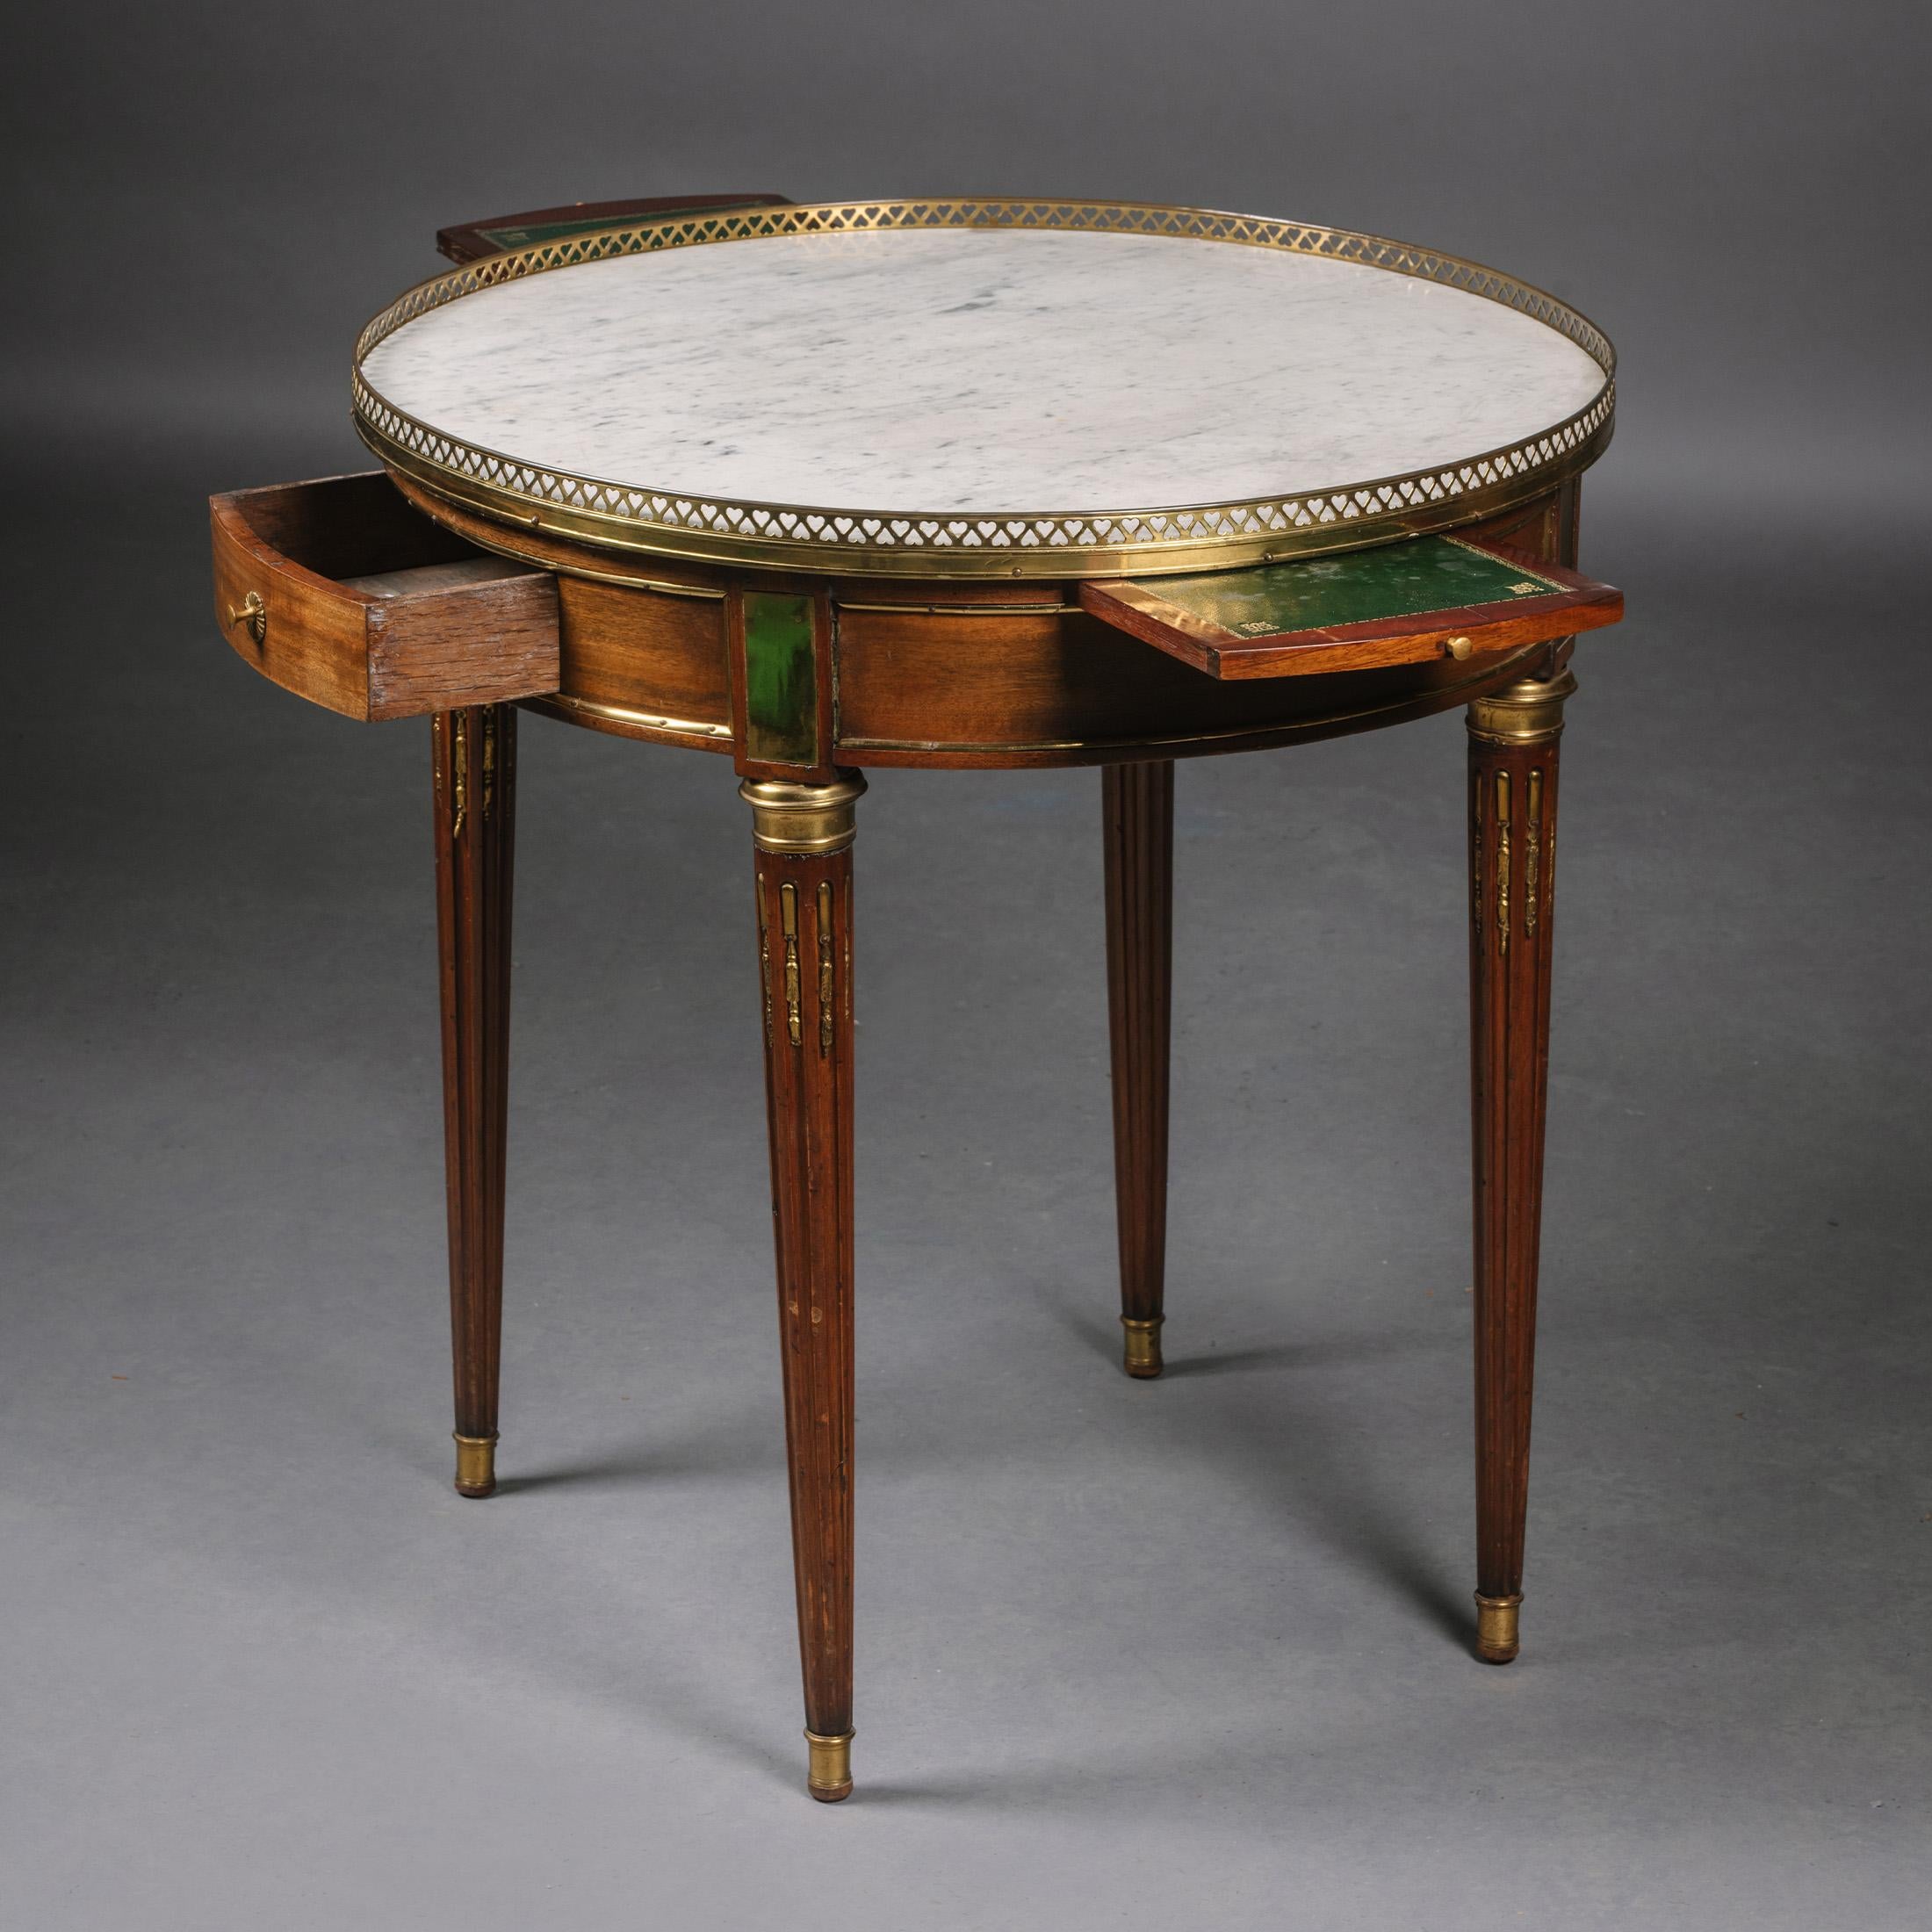 A Louis XVI Style Gilt-Bronze Mounted Mahogany Gueridon.

This charming occasional table is of an especially useful Size. It has a white marble top with a brass gallery pierced with heart-shaped holes, above a small frieze drawer flanked to each